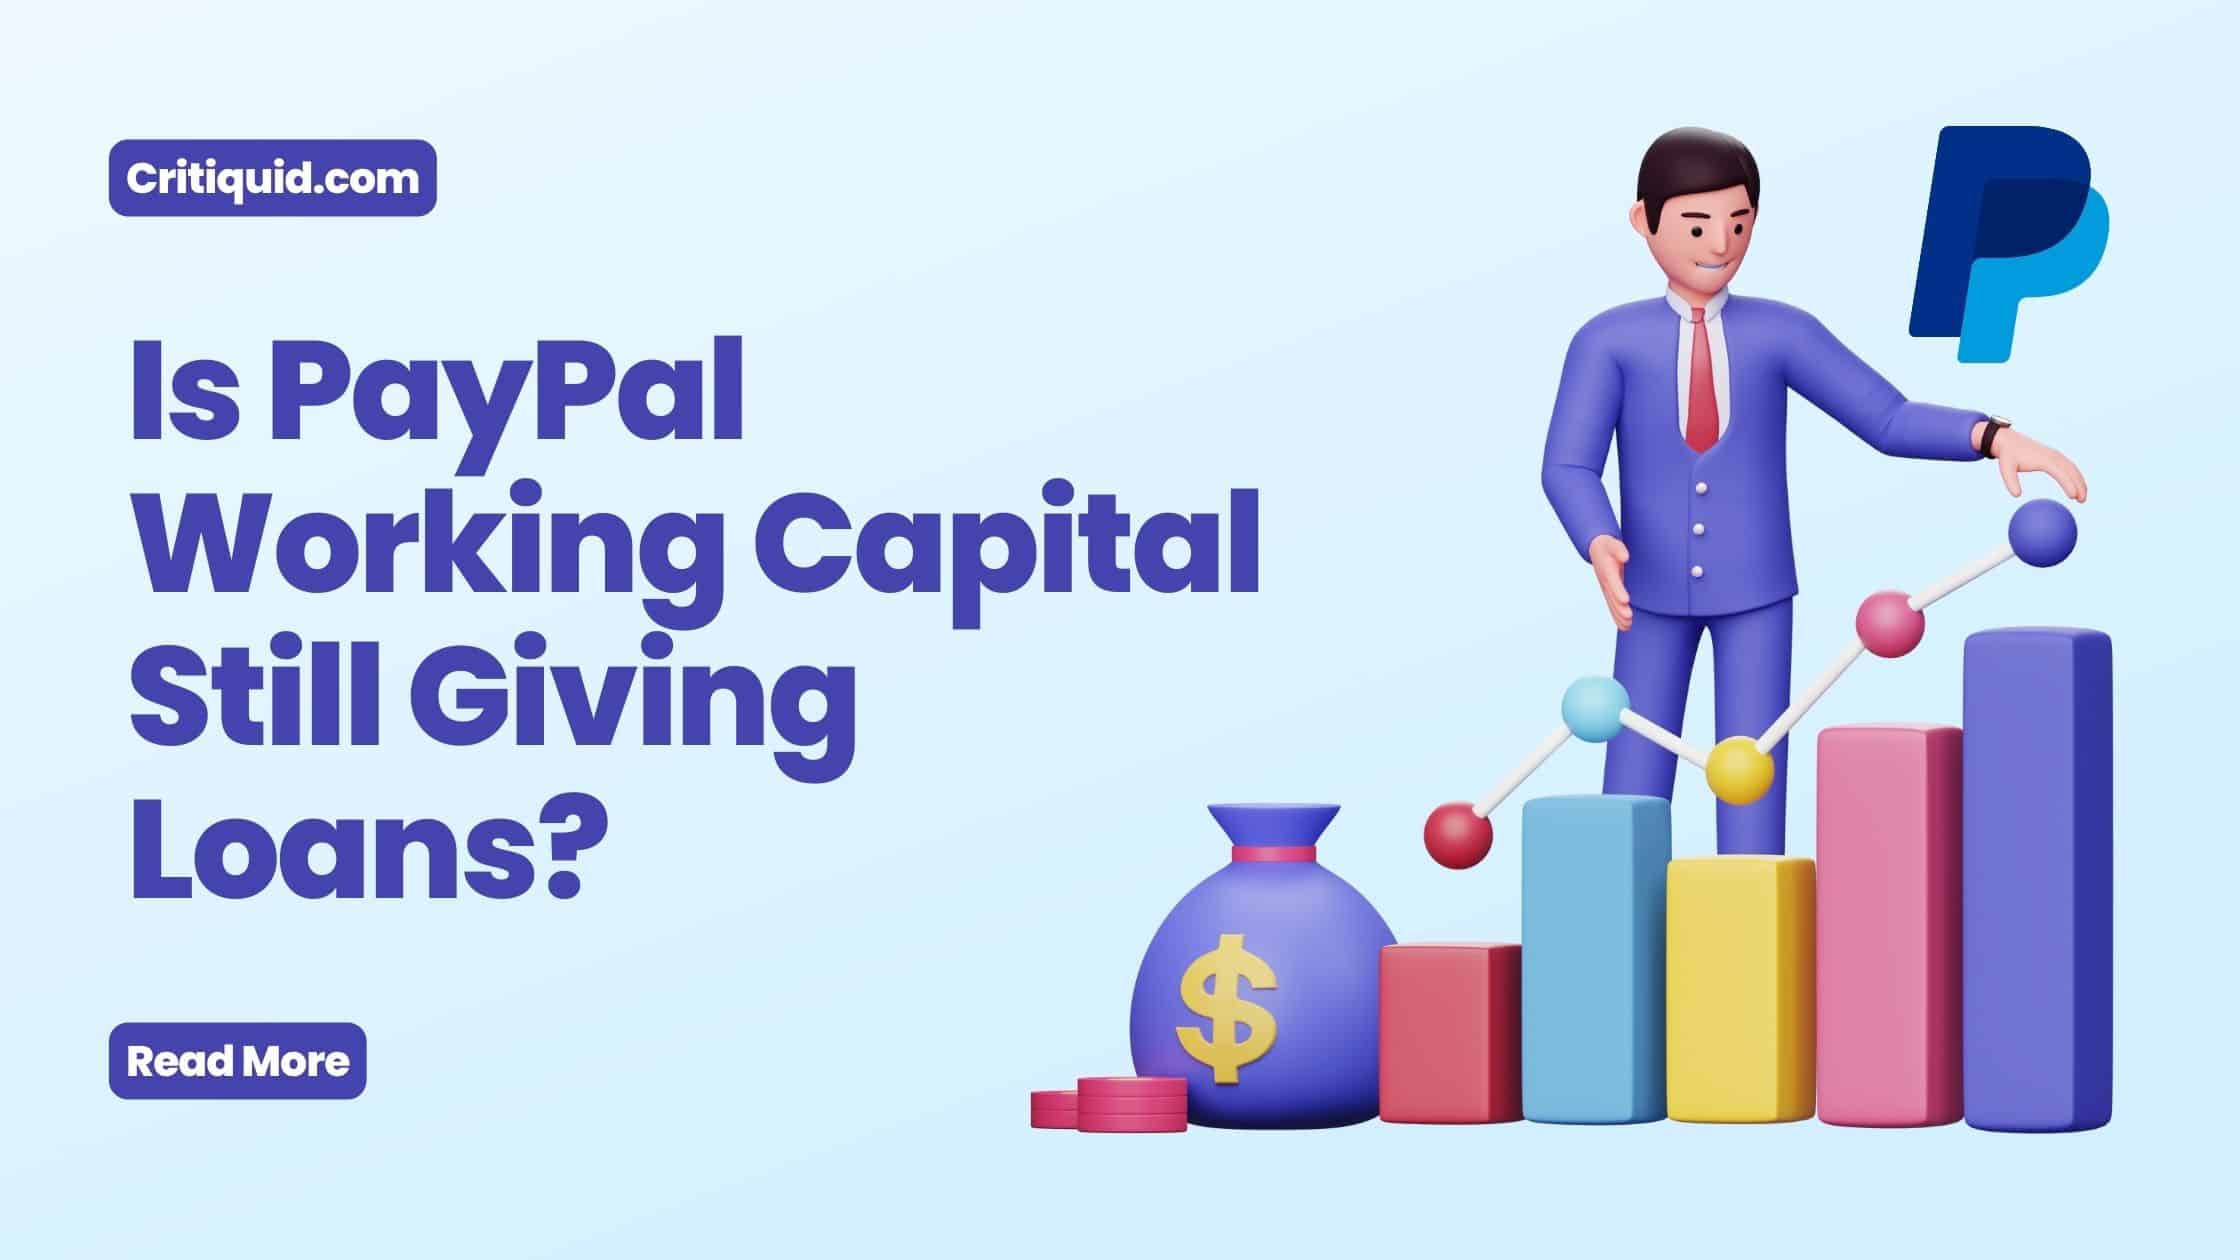 Is PayPal Working Capital Still Giving Loans?